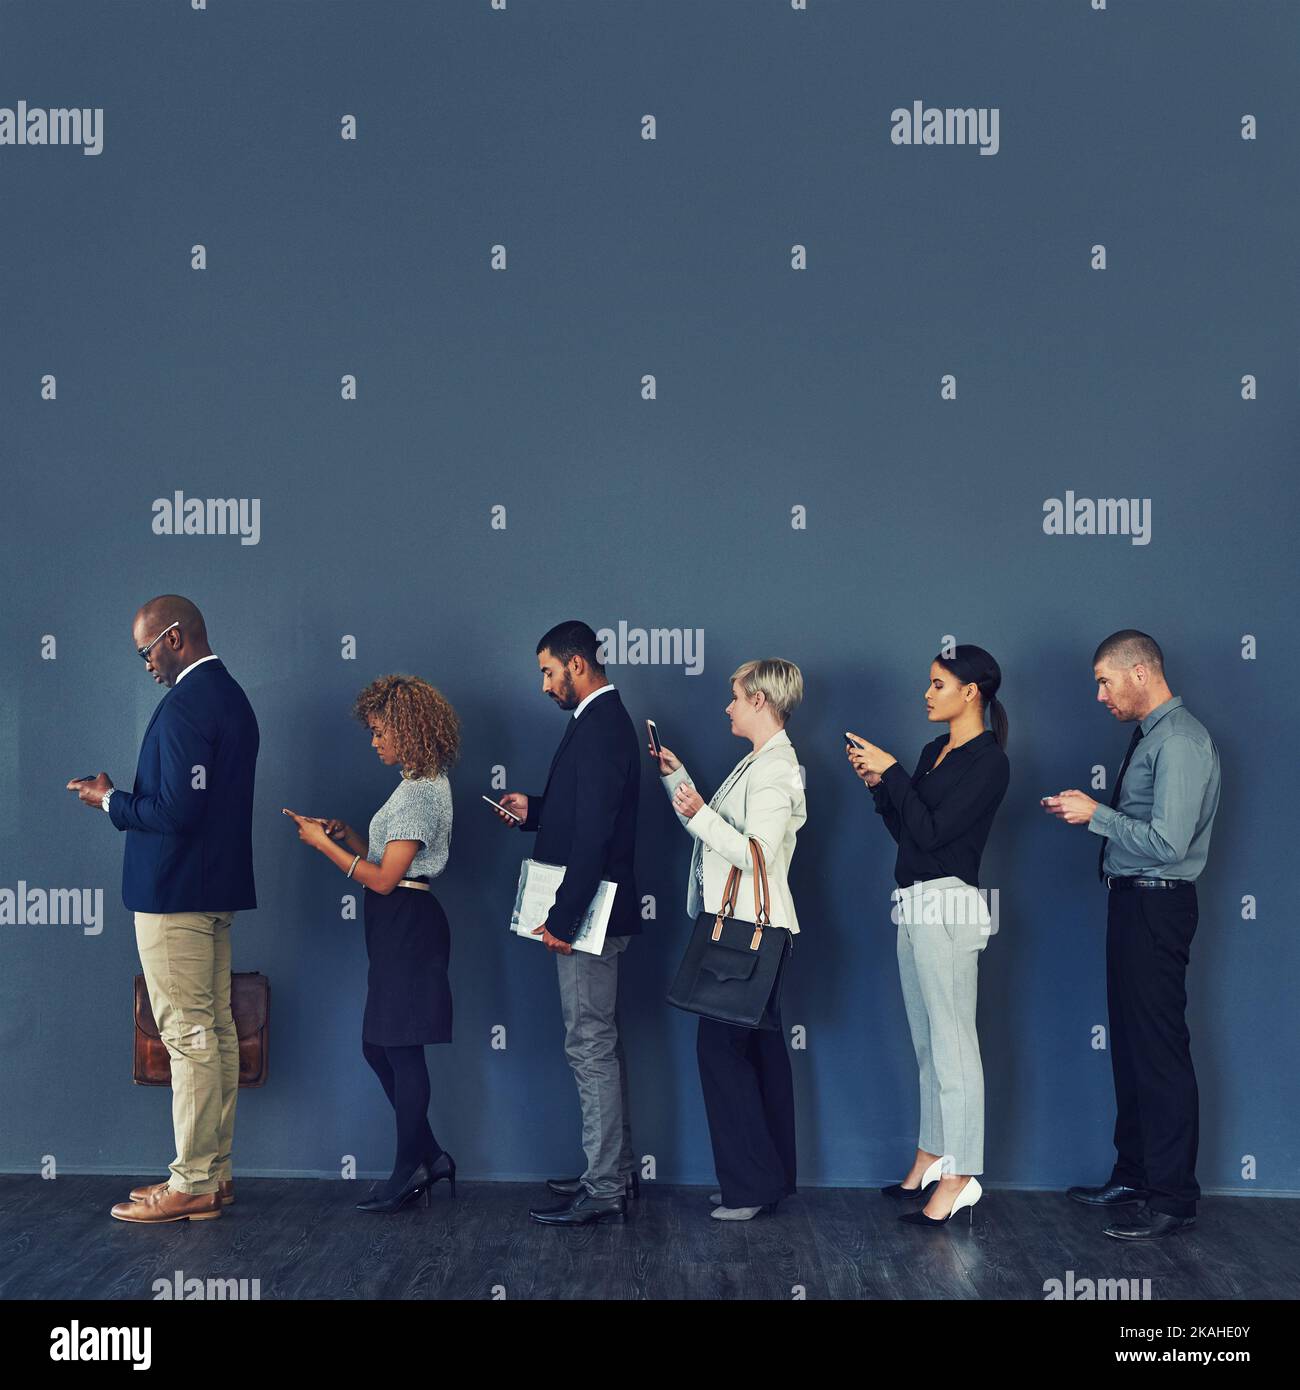 In line for opportunity. Studio shot of a group of businesspeople using wireless devices while waiting in line. Stock Photo